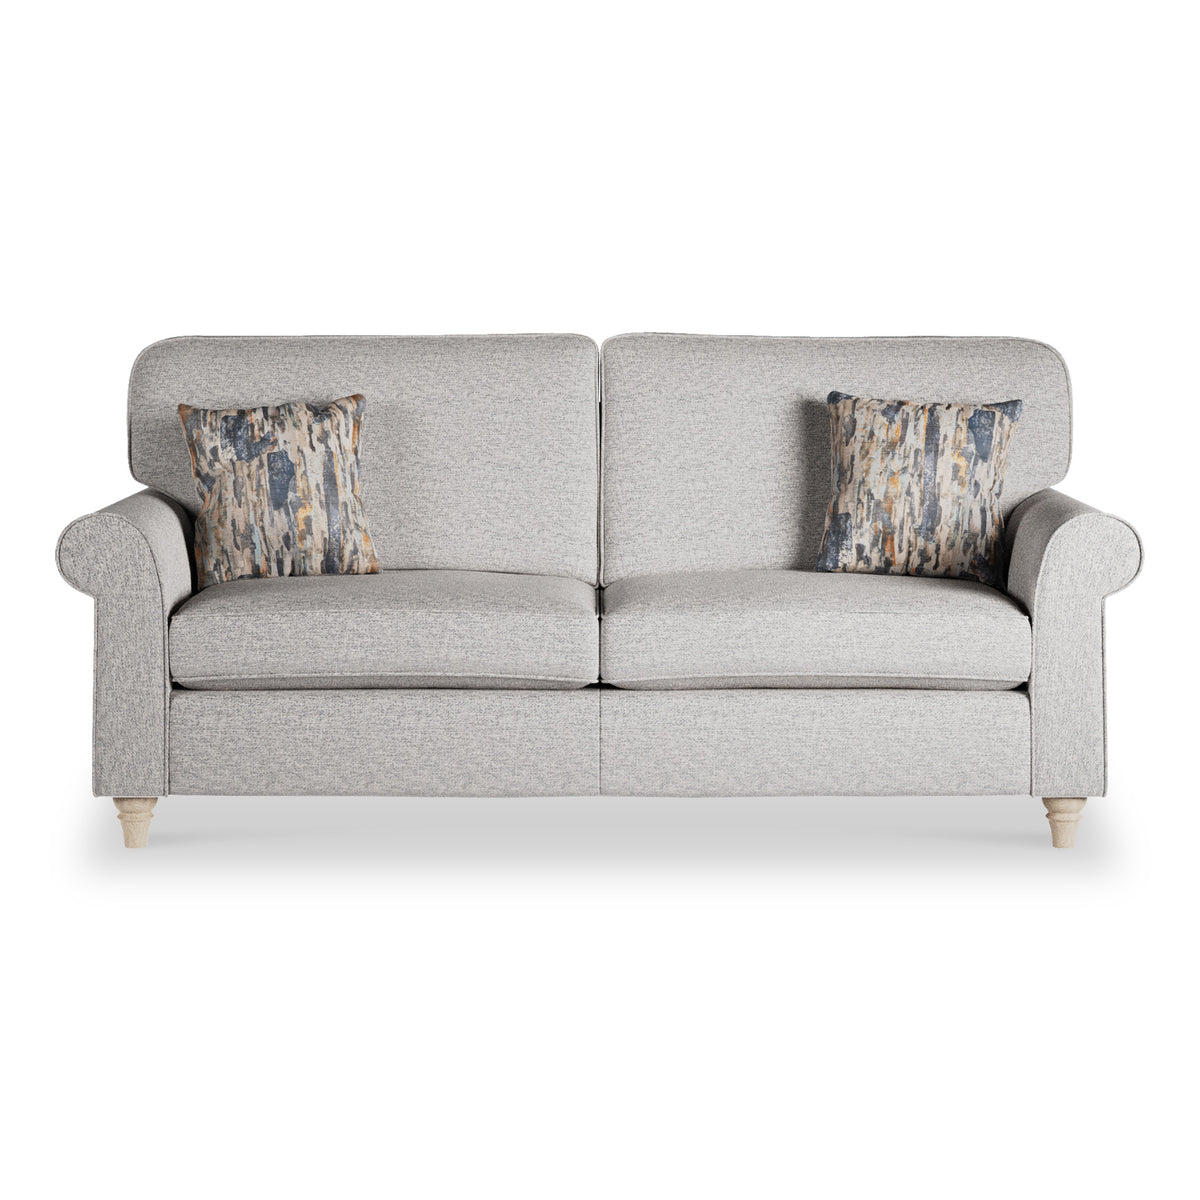 Jude Zinc 3 Seater Couch